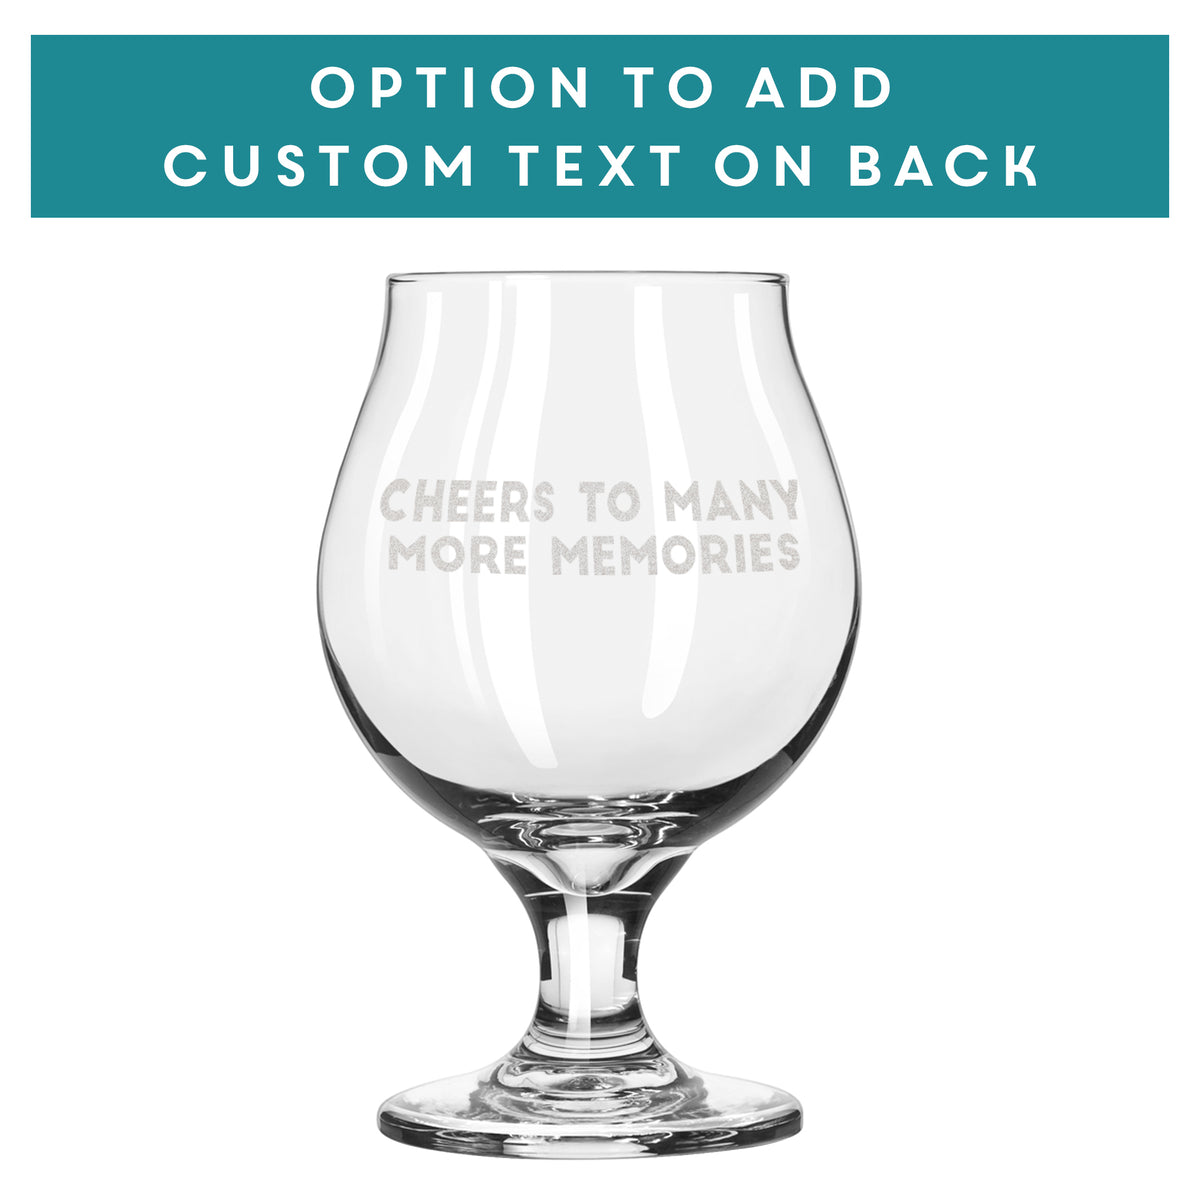 Personalized Belgian Beer Glasses - Design: CUSTOM - Everything Etched